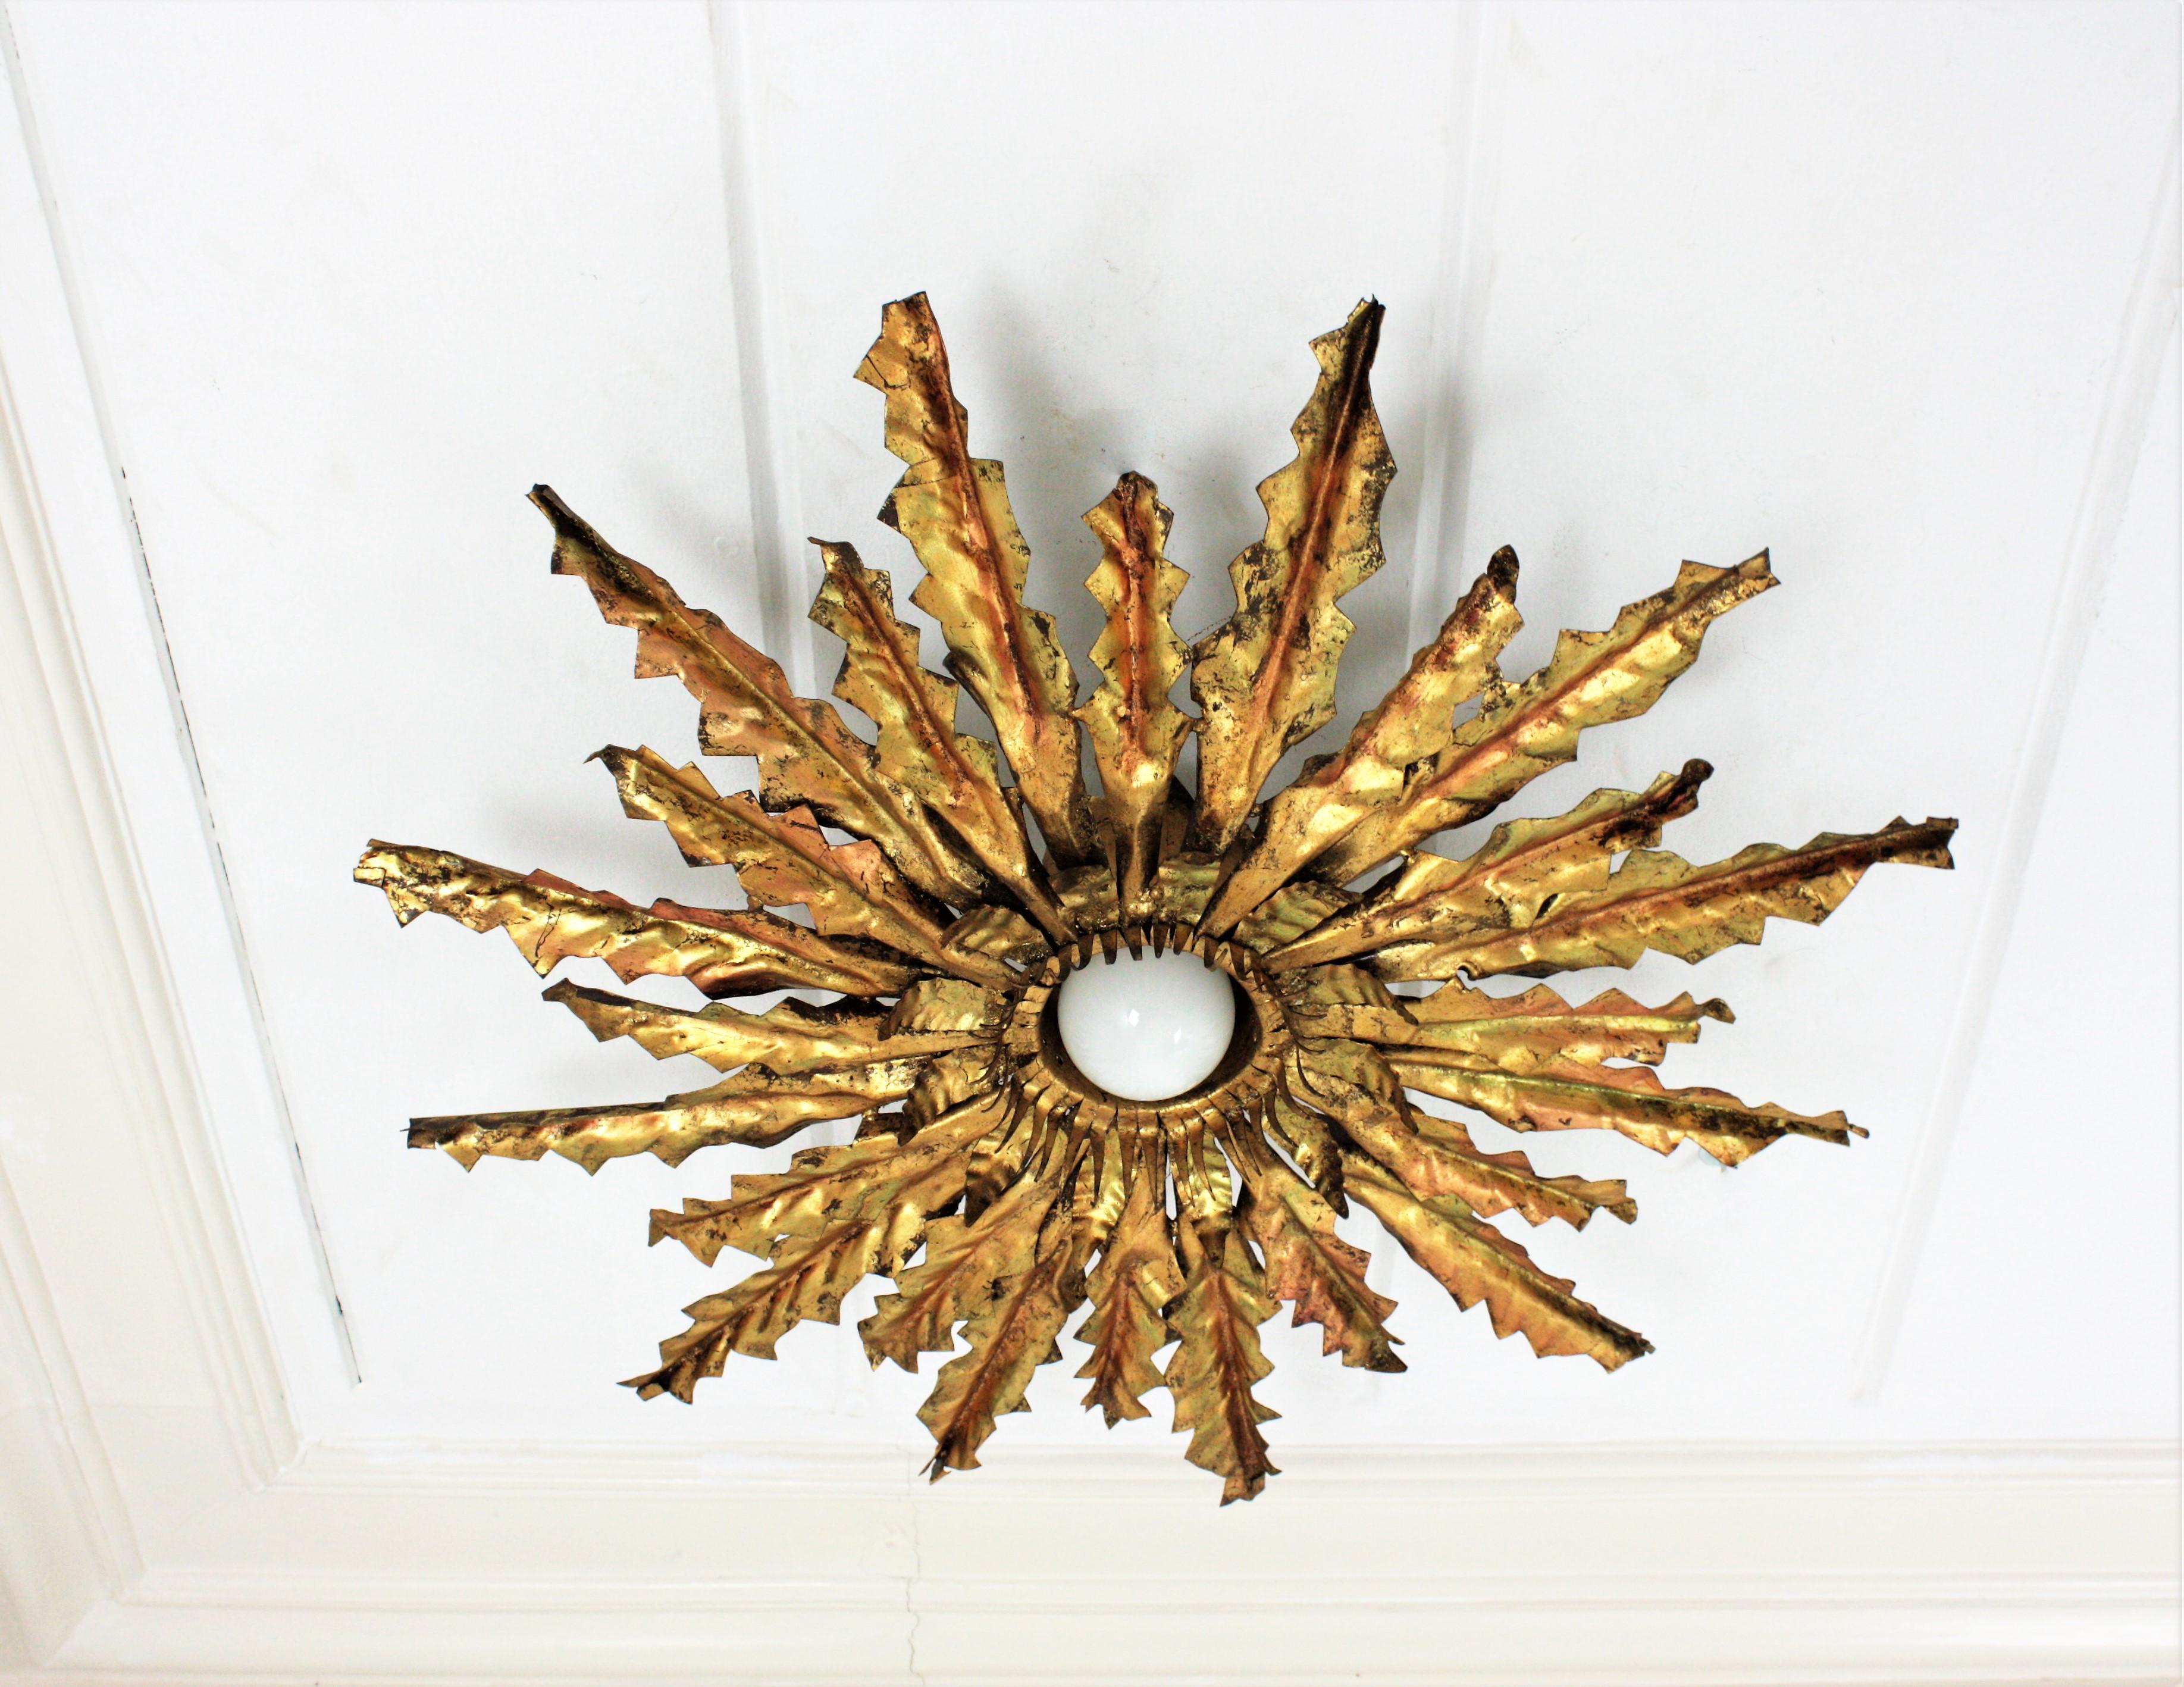 Monumental brutalist sunburst starburst leafed gilt metal pendant lamp or ceiling light fixture. Spain, 1950s
This handcrafted Brutalist ceiling lamp features a triple layered leafed sunburst light fixture hanging from a chain ended with a beautiful